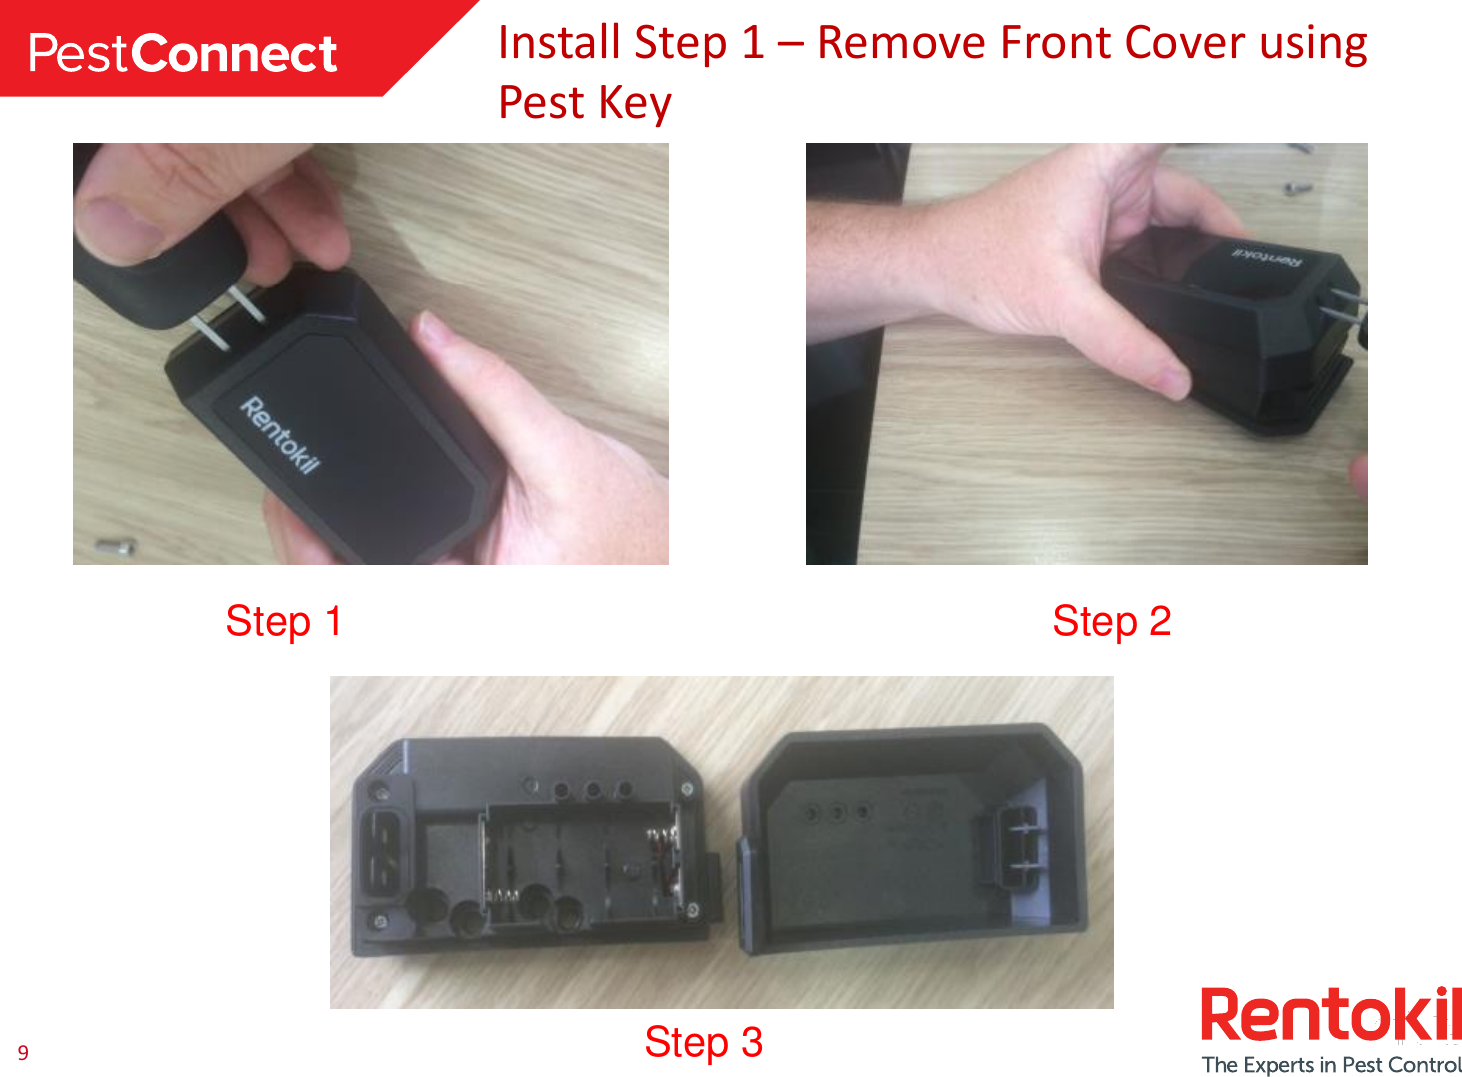 9Install Step 1 –Remove Front Cover using Pest KeyStep 1 Step 2Step 3